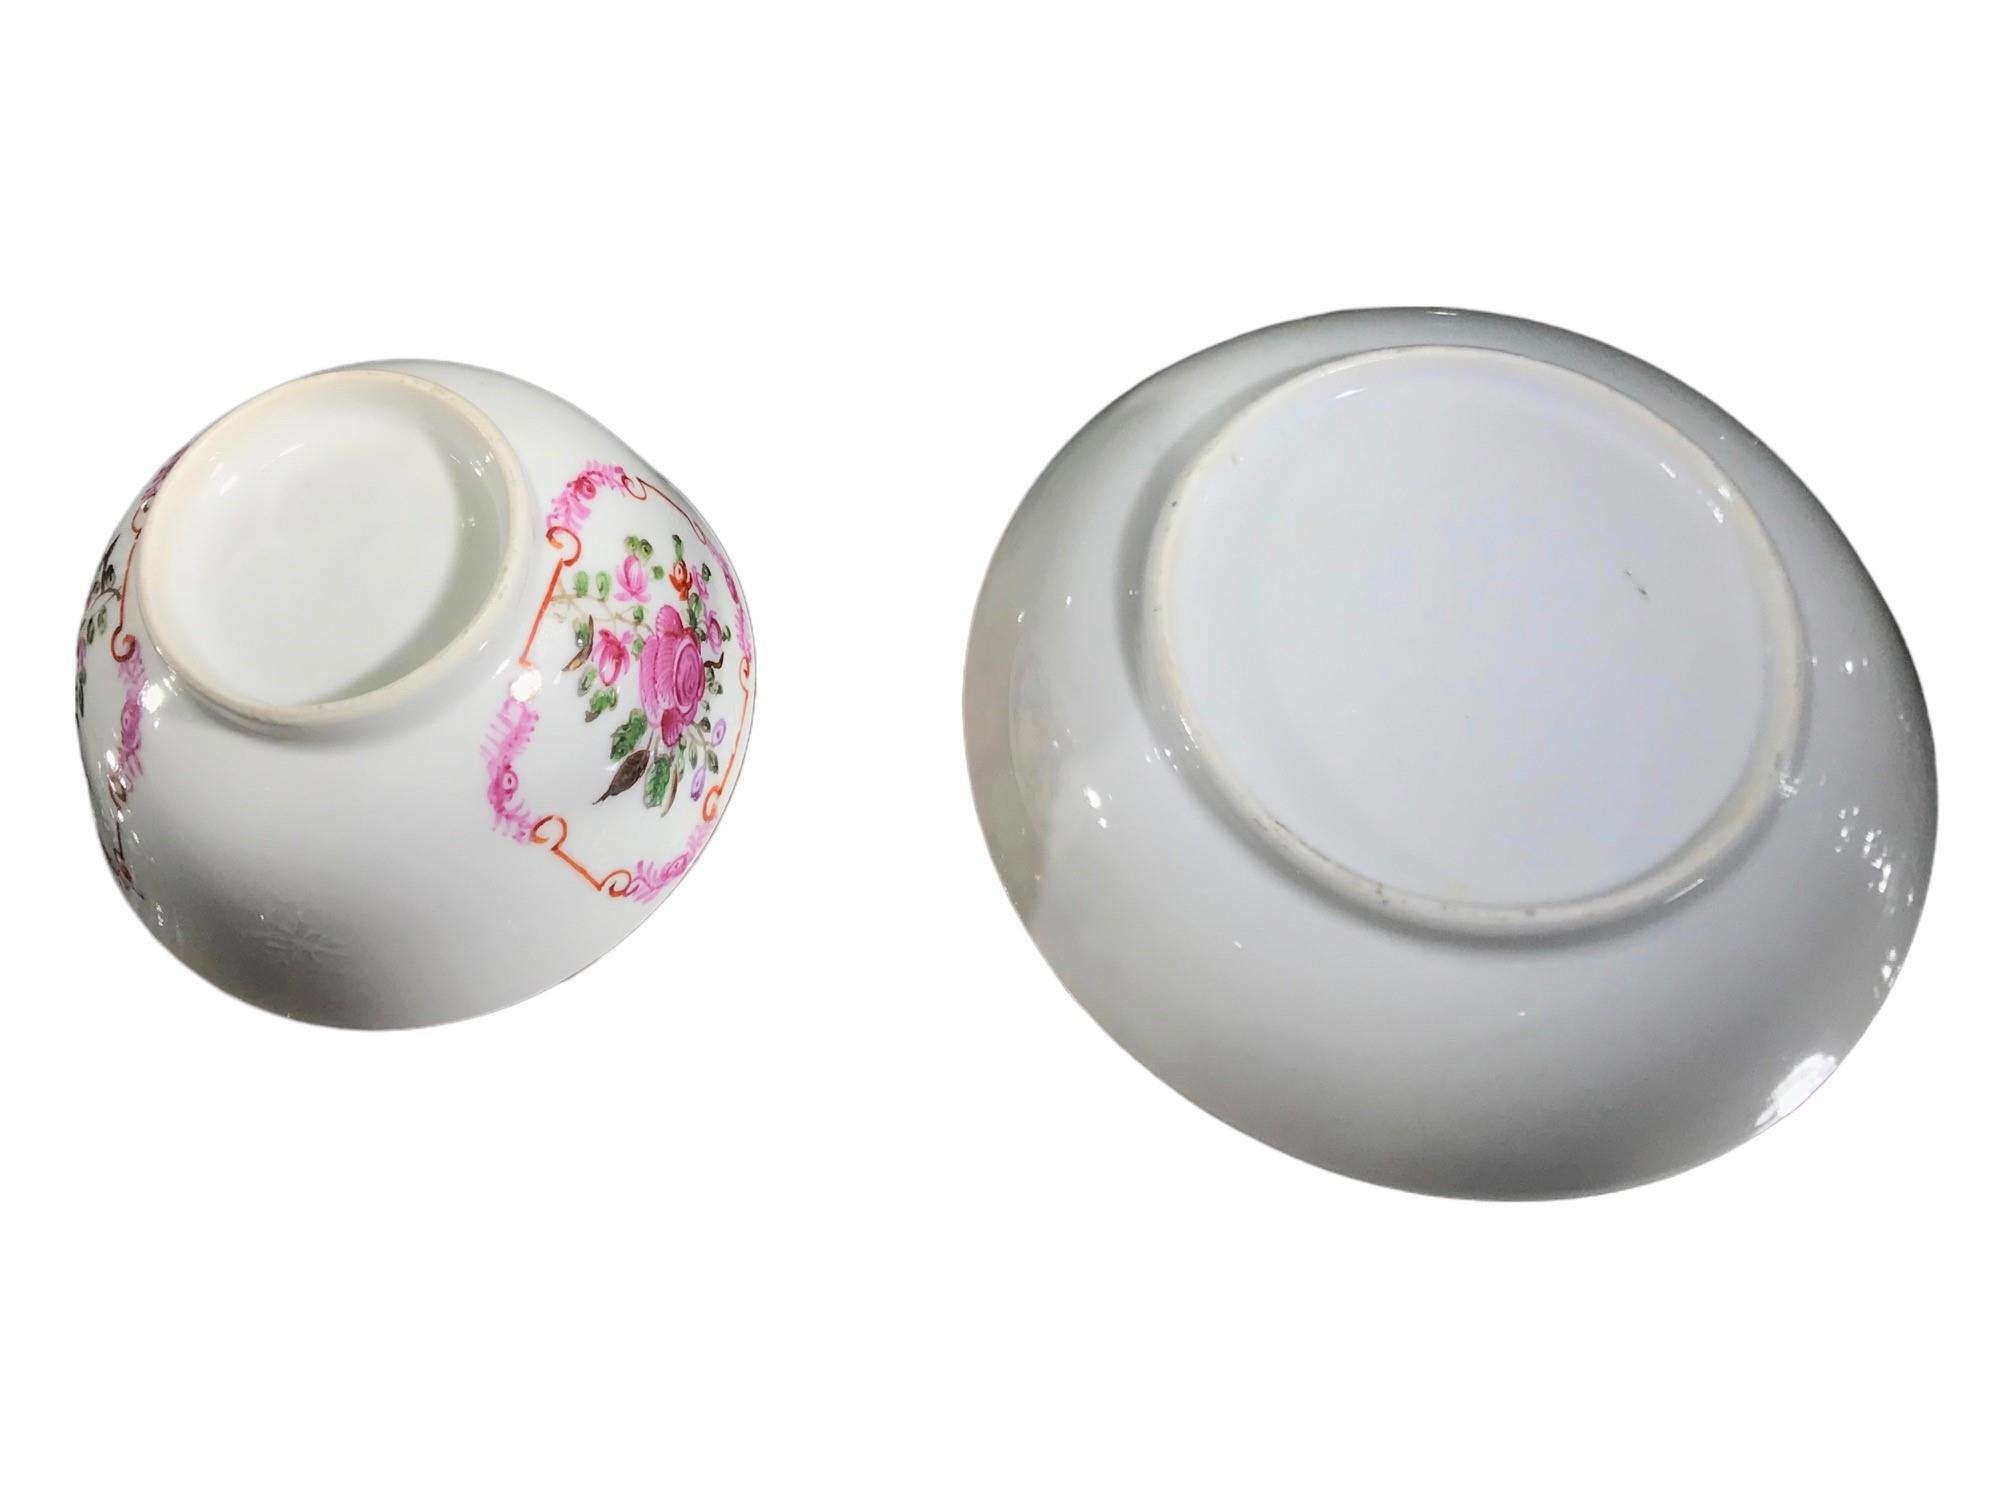 AN 18TH CENTURY CHINESE EXPORT FAMILLE ROSE PORCELAIN TEA BOWL AND SAUCER Decorated with roses and - Image 3 of 3